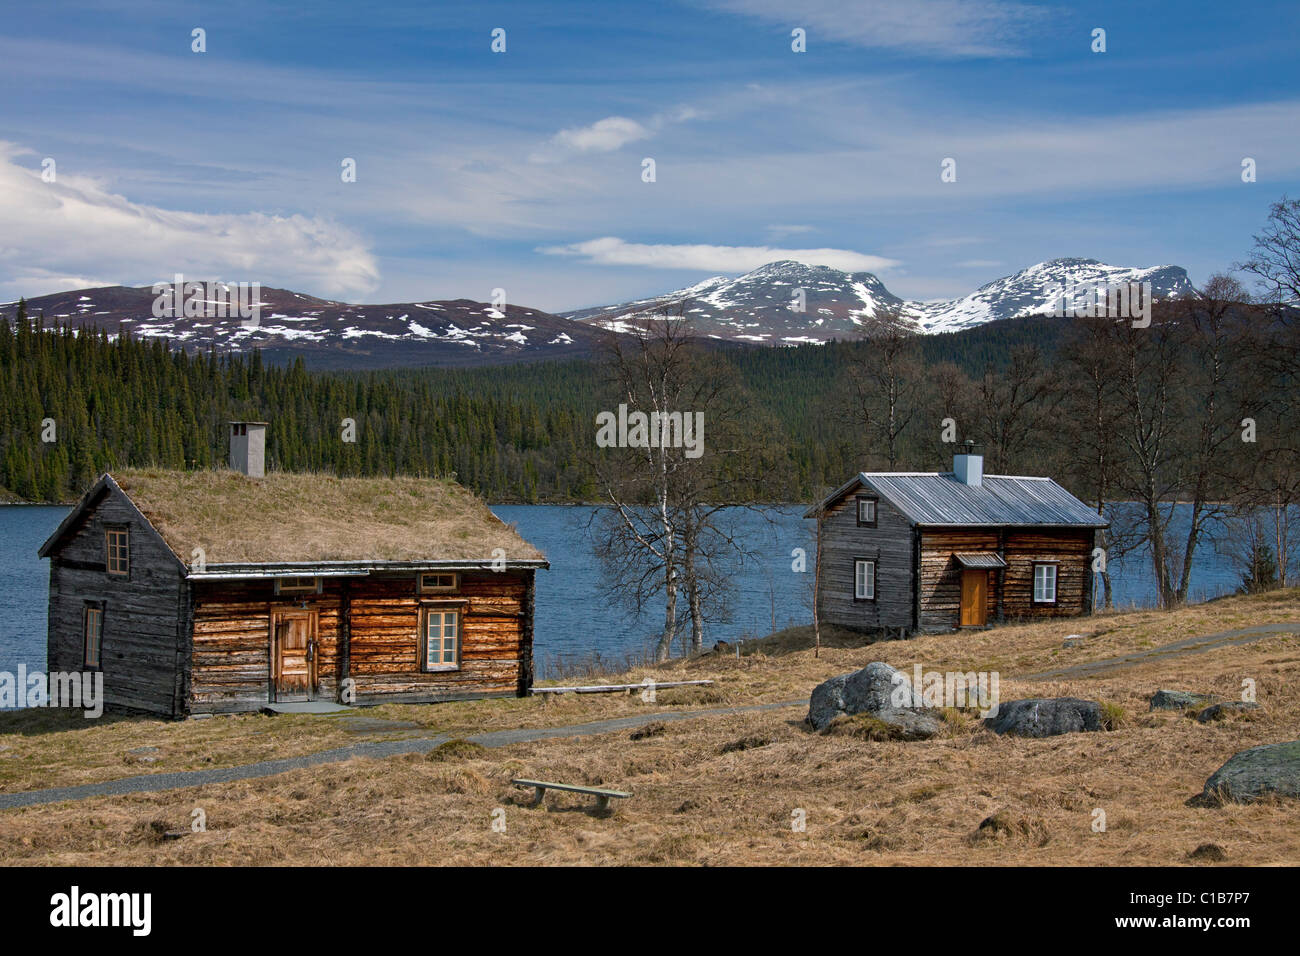 Log cabin with sod roof along lake at Fatmomakke, Lapland, Sweden Stock Photo